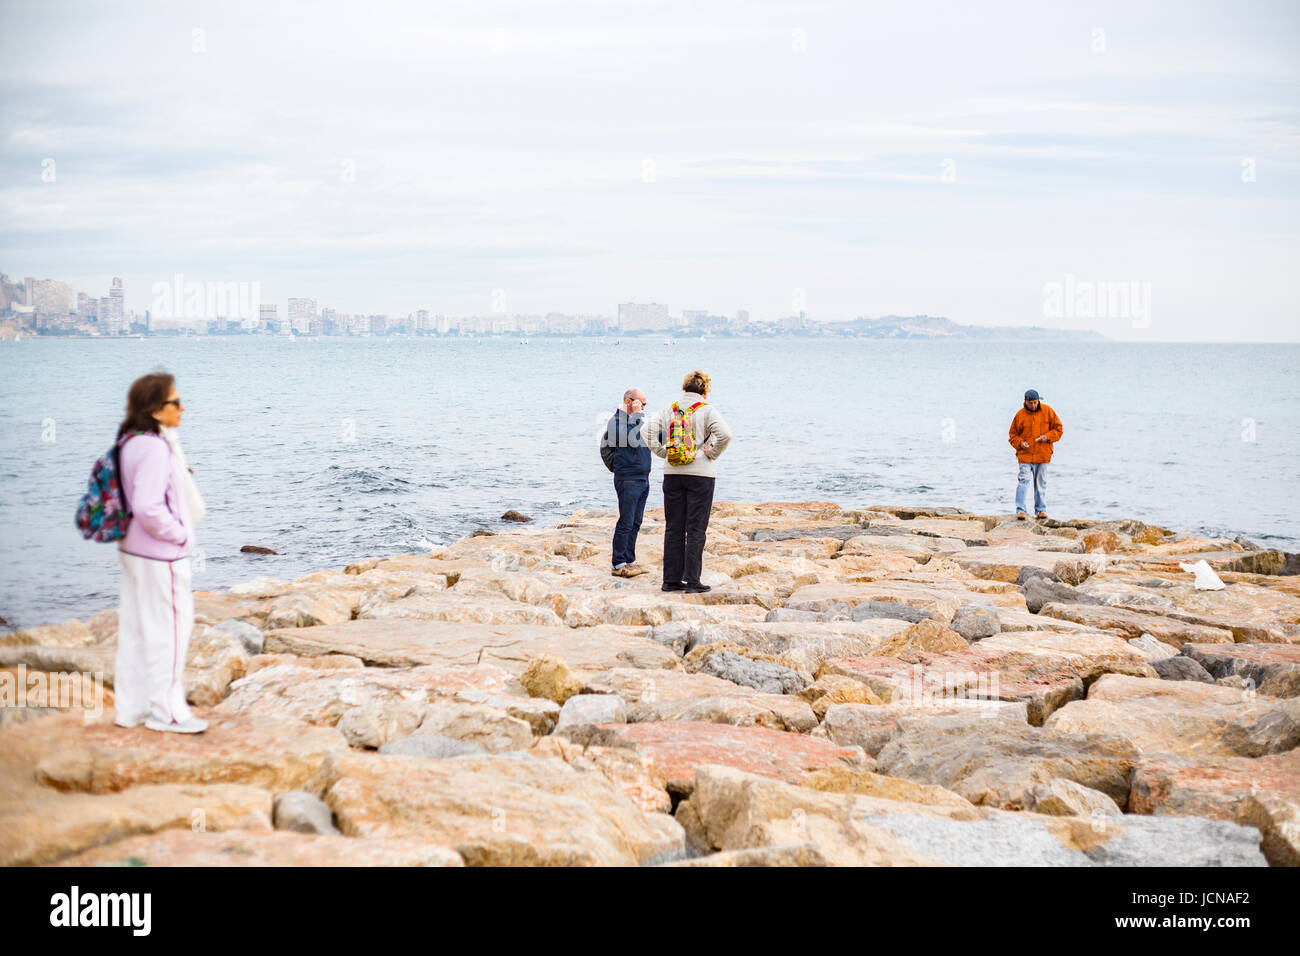 people out on the rocks, Alicante, Spain. Stock Photo